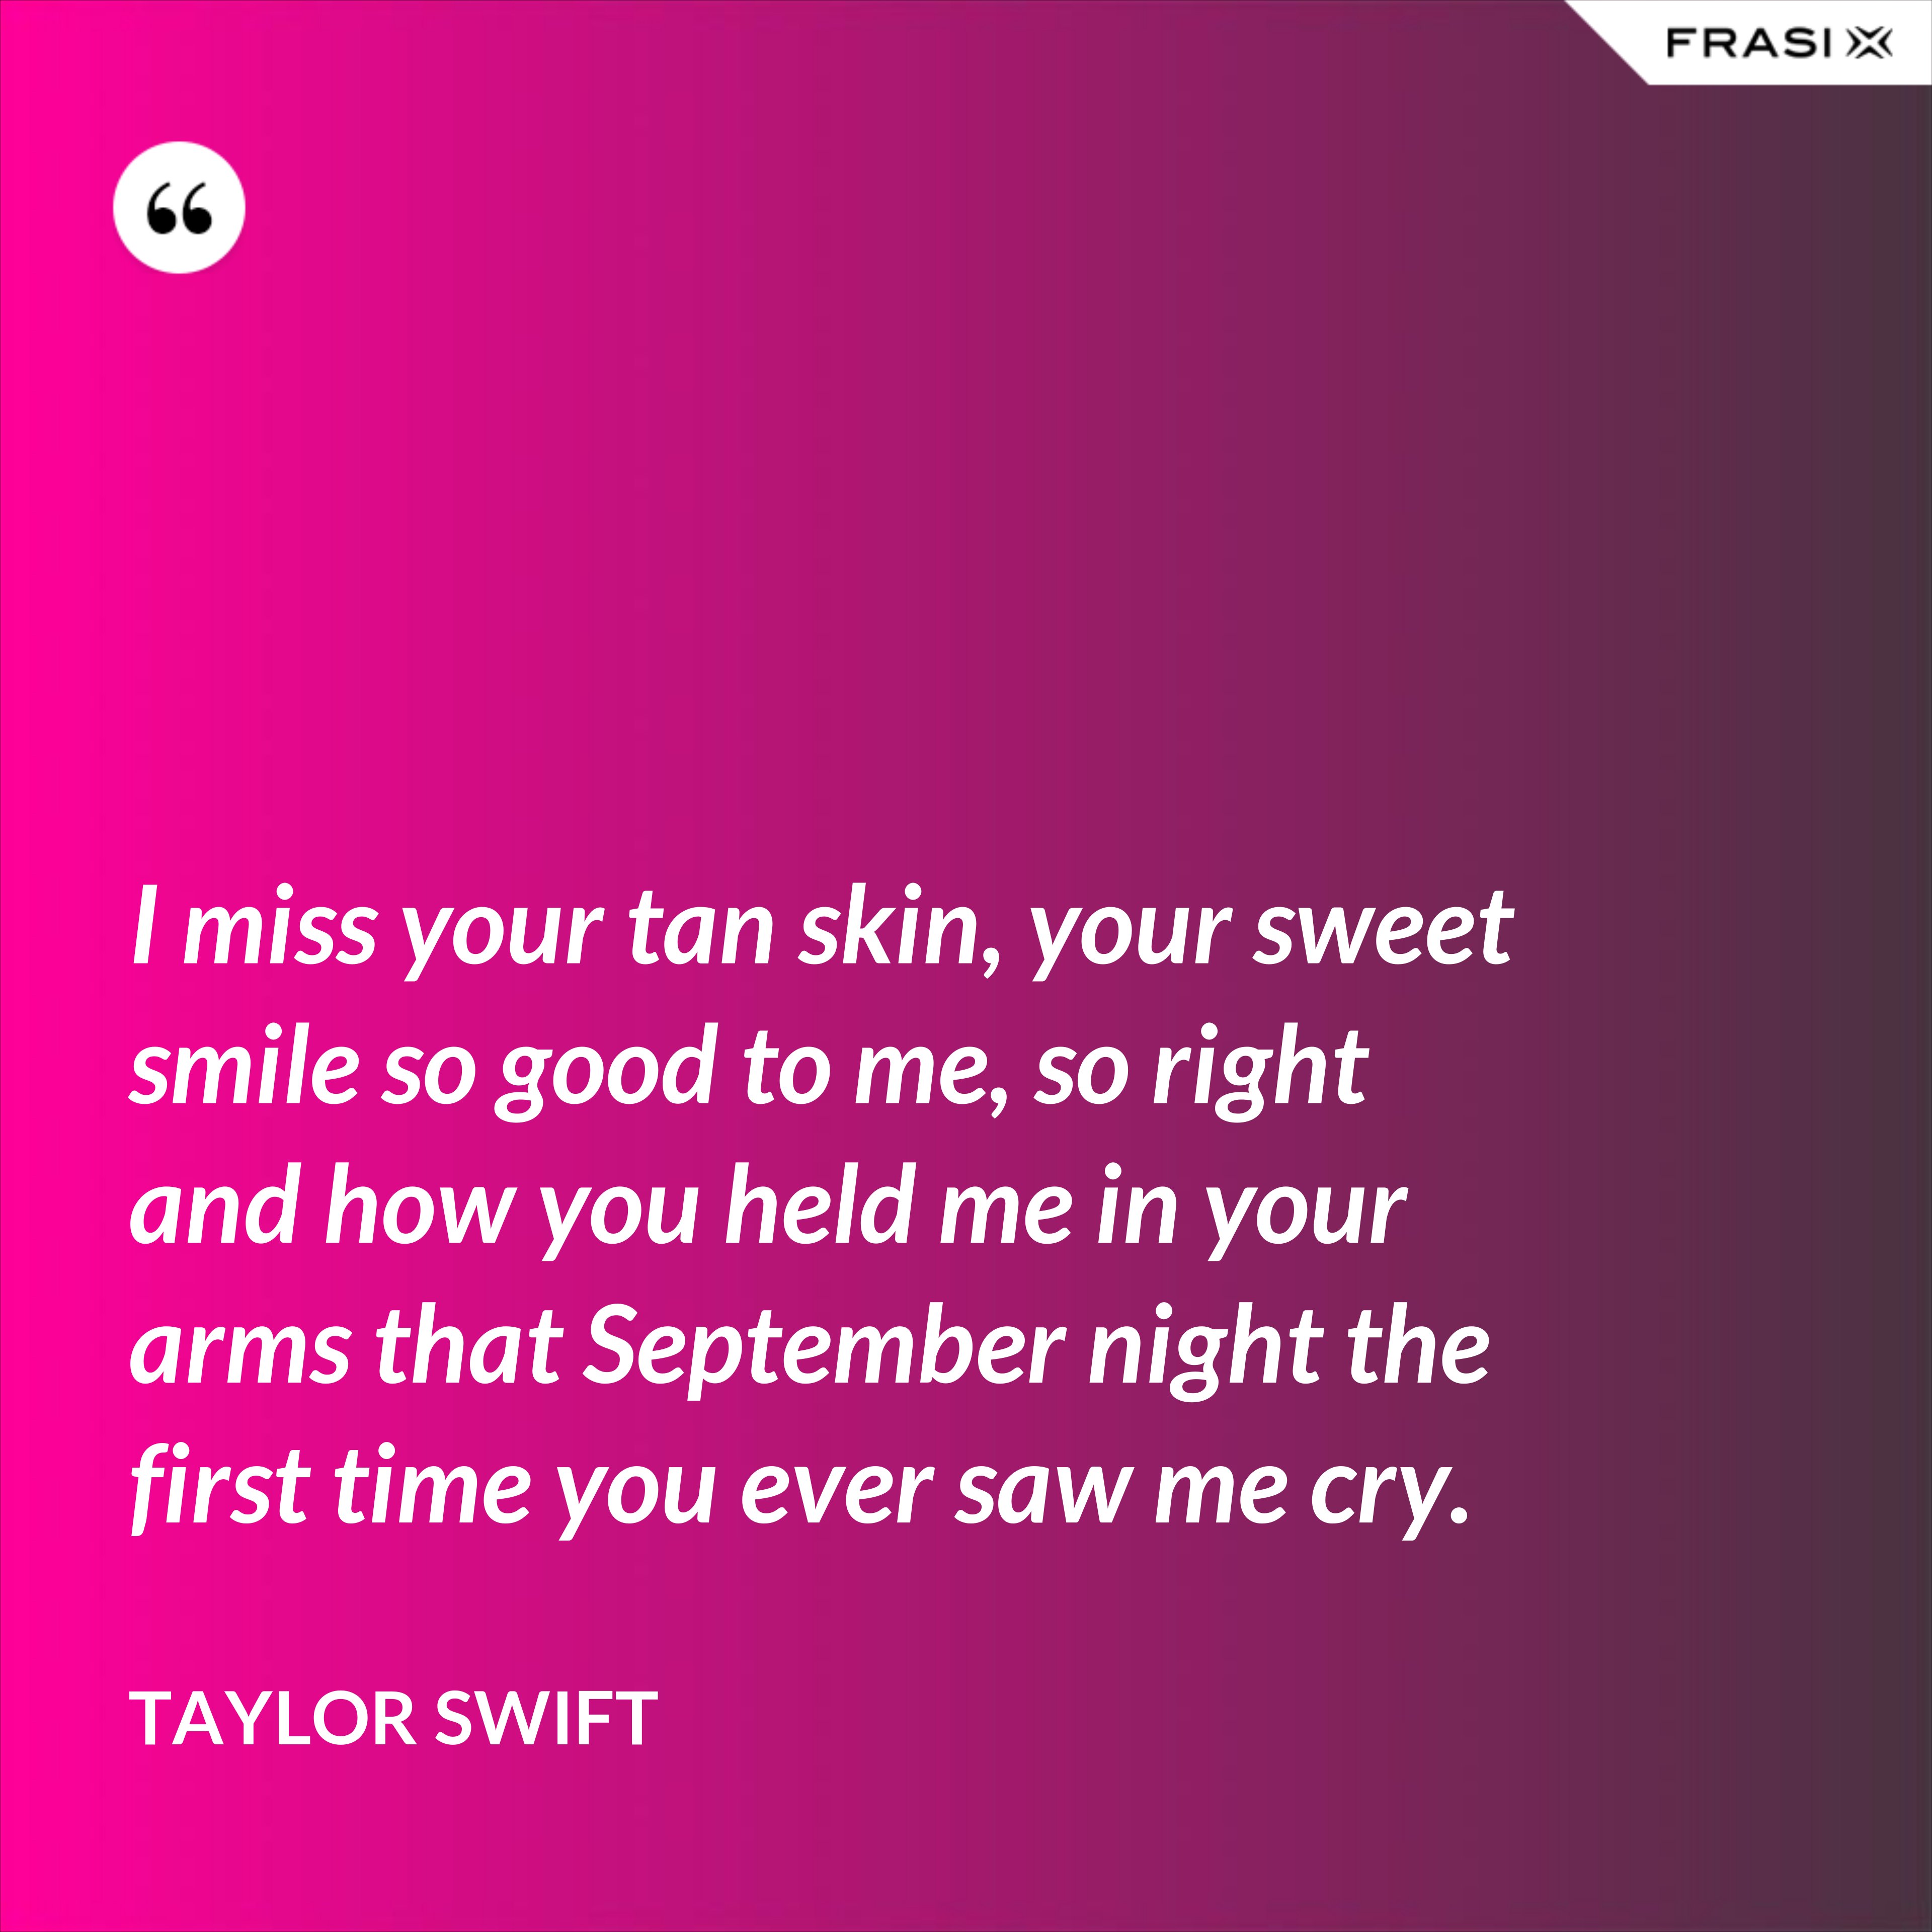 I miss your tan skin, your sweet smile so good to me, so right and how you held me in your arms that September night the first time you ever saw me cry. - Taylor Swift